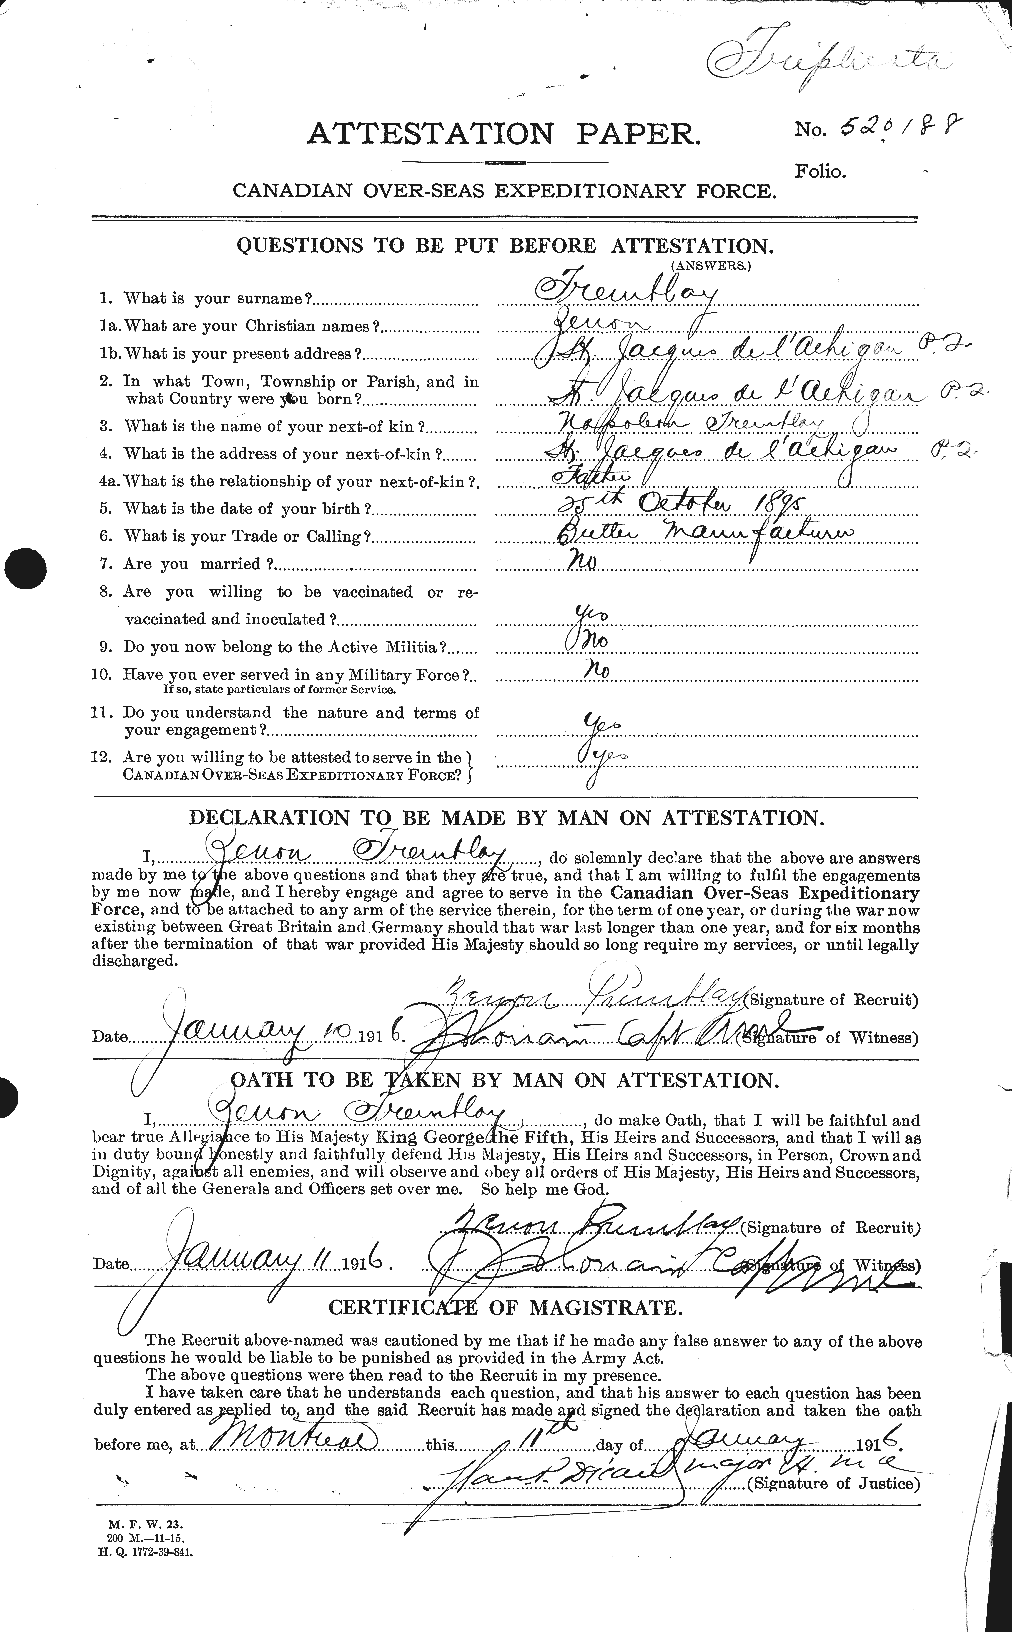 Personnel Records of the First World War - CEF 638353a